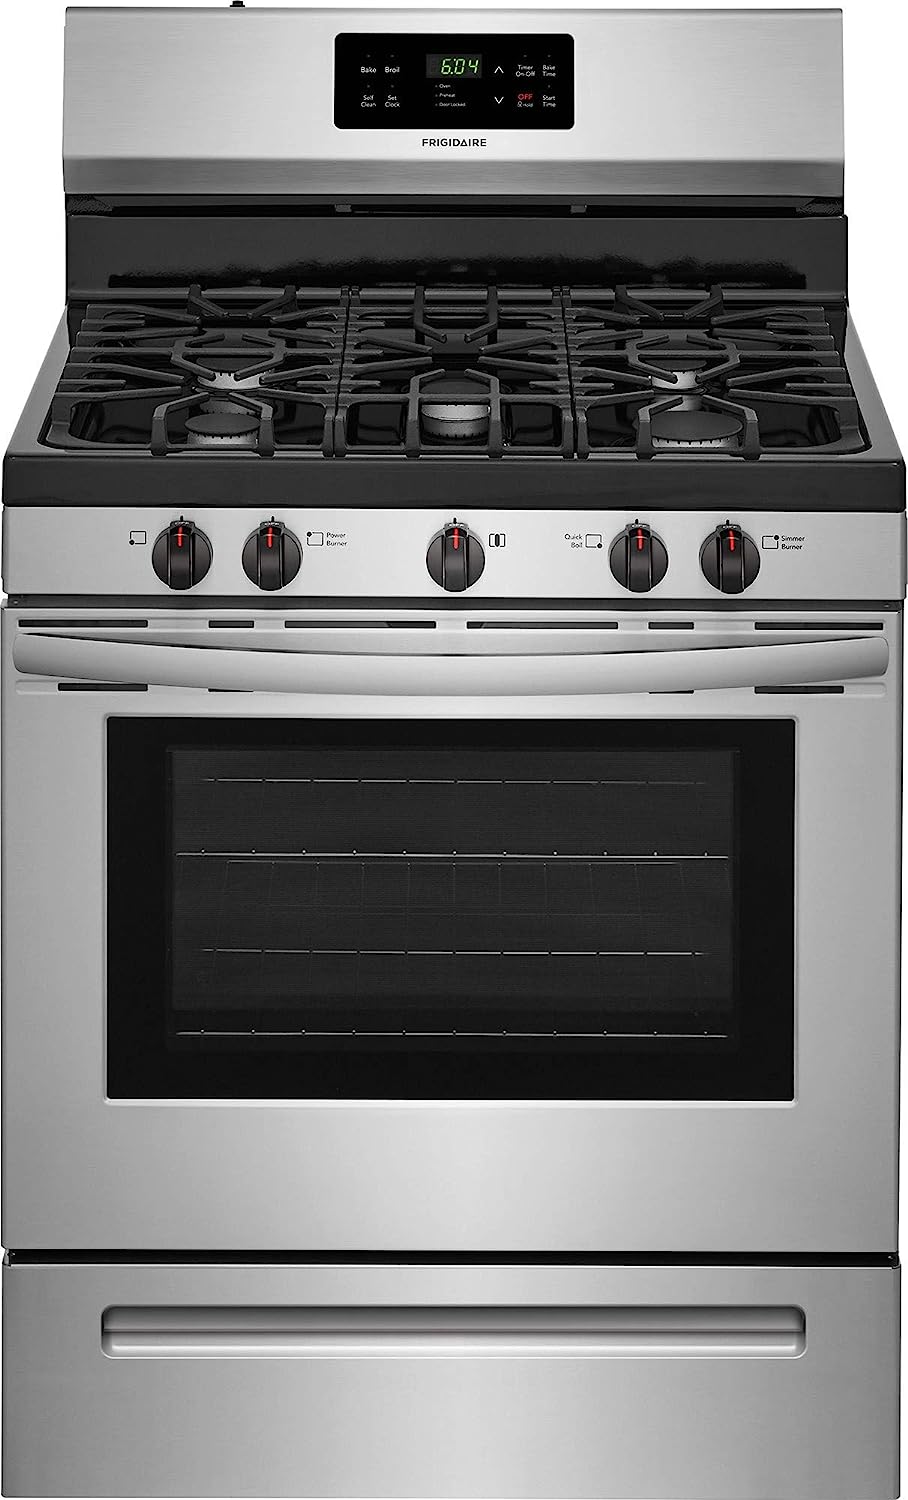 FFGF3054TS 30 Gas Range with 5 Burners 5 cu. ft. Oven [...]